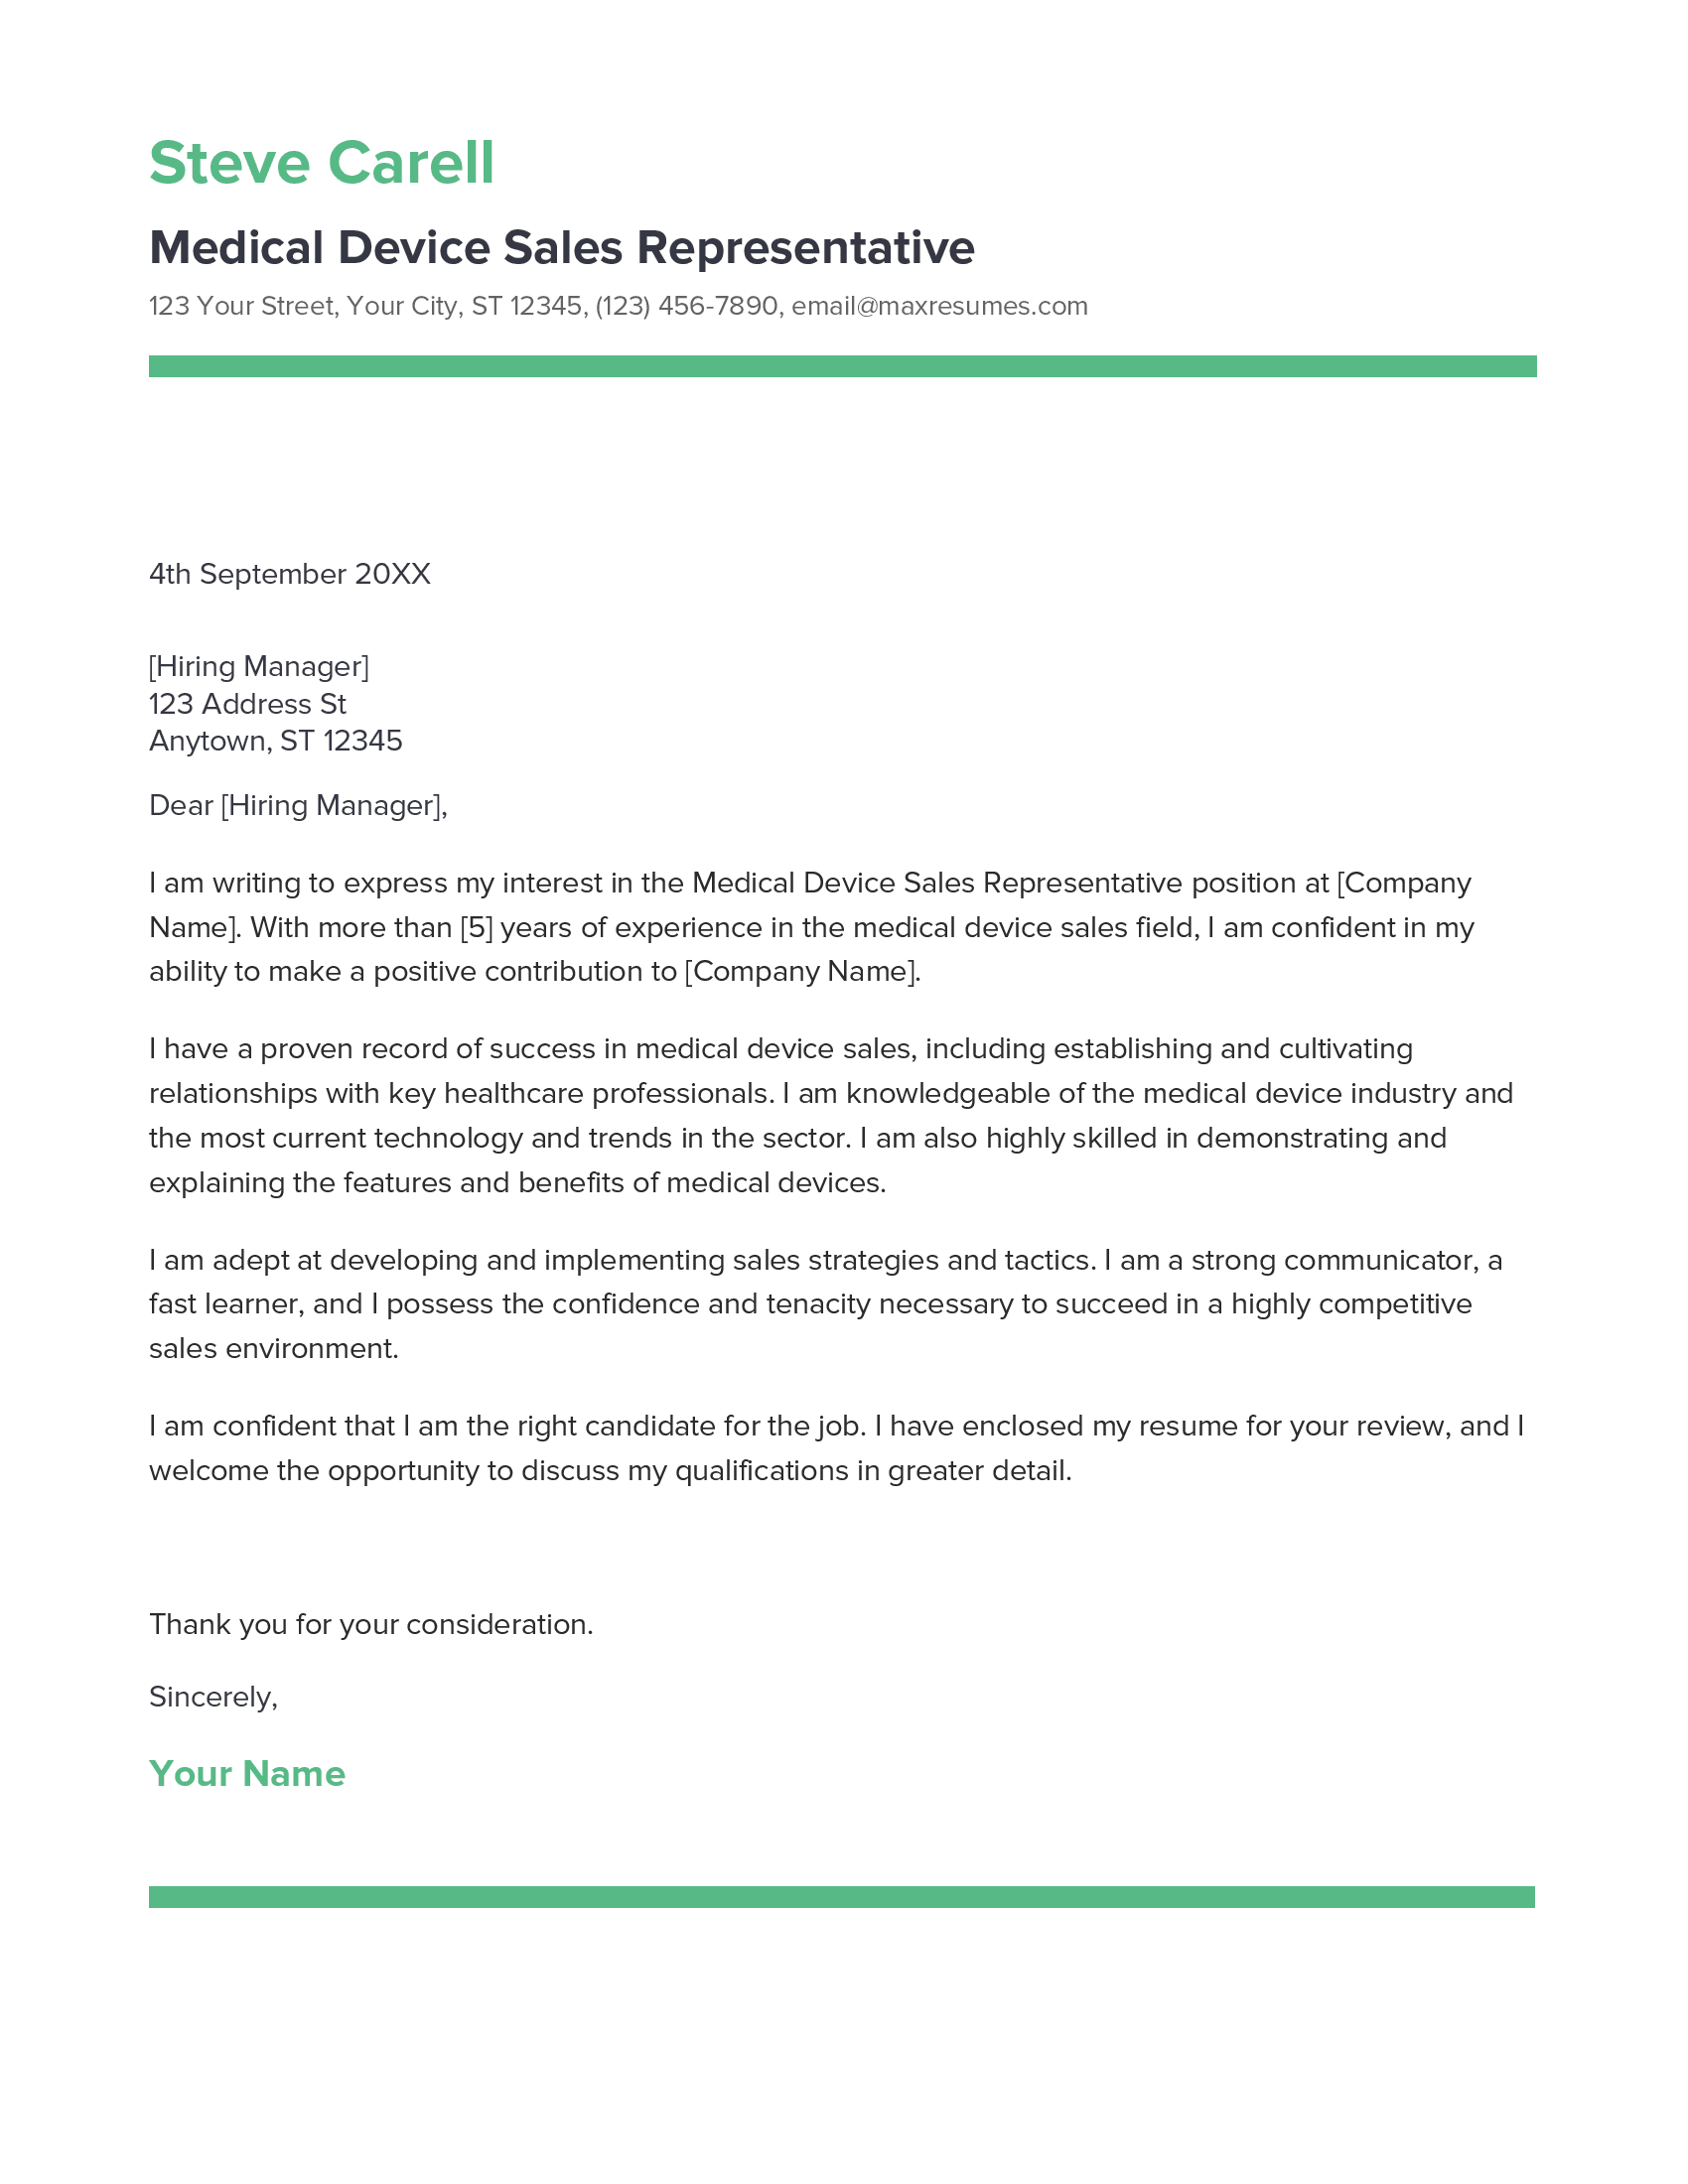 Medical Device Sales Representative Cover Letter Example